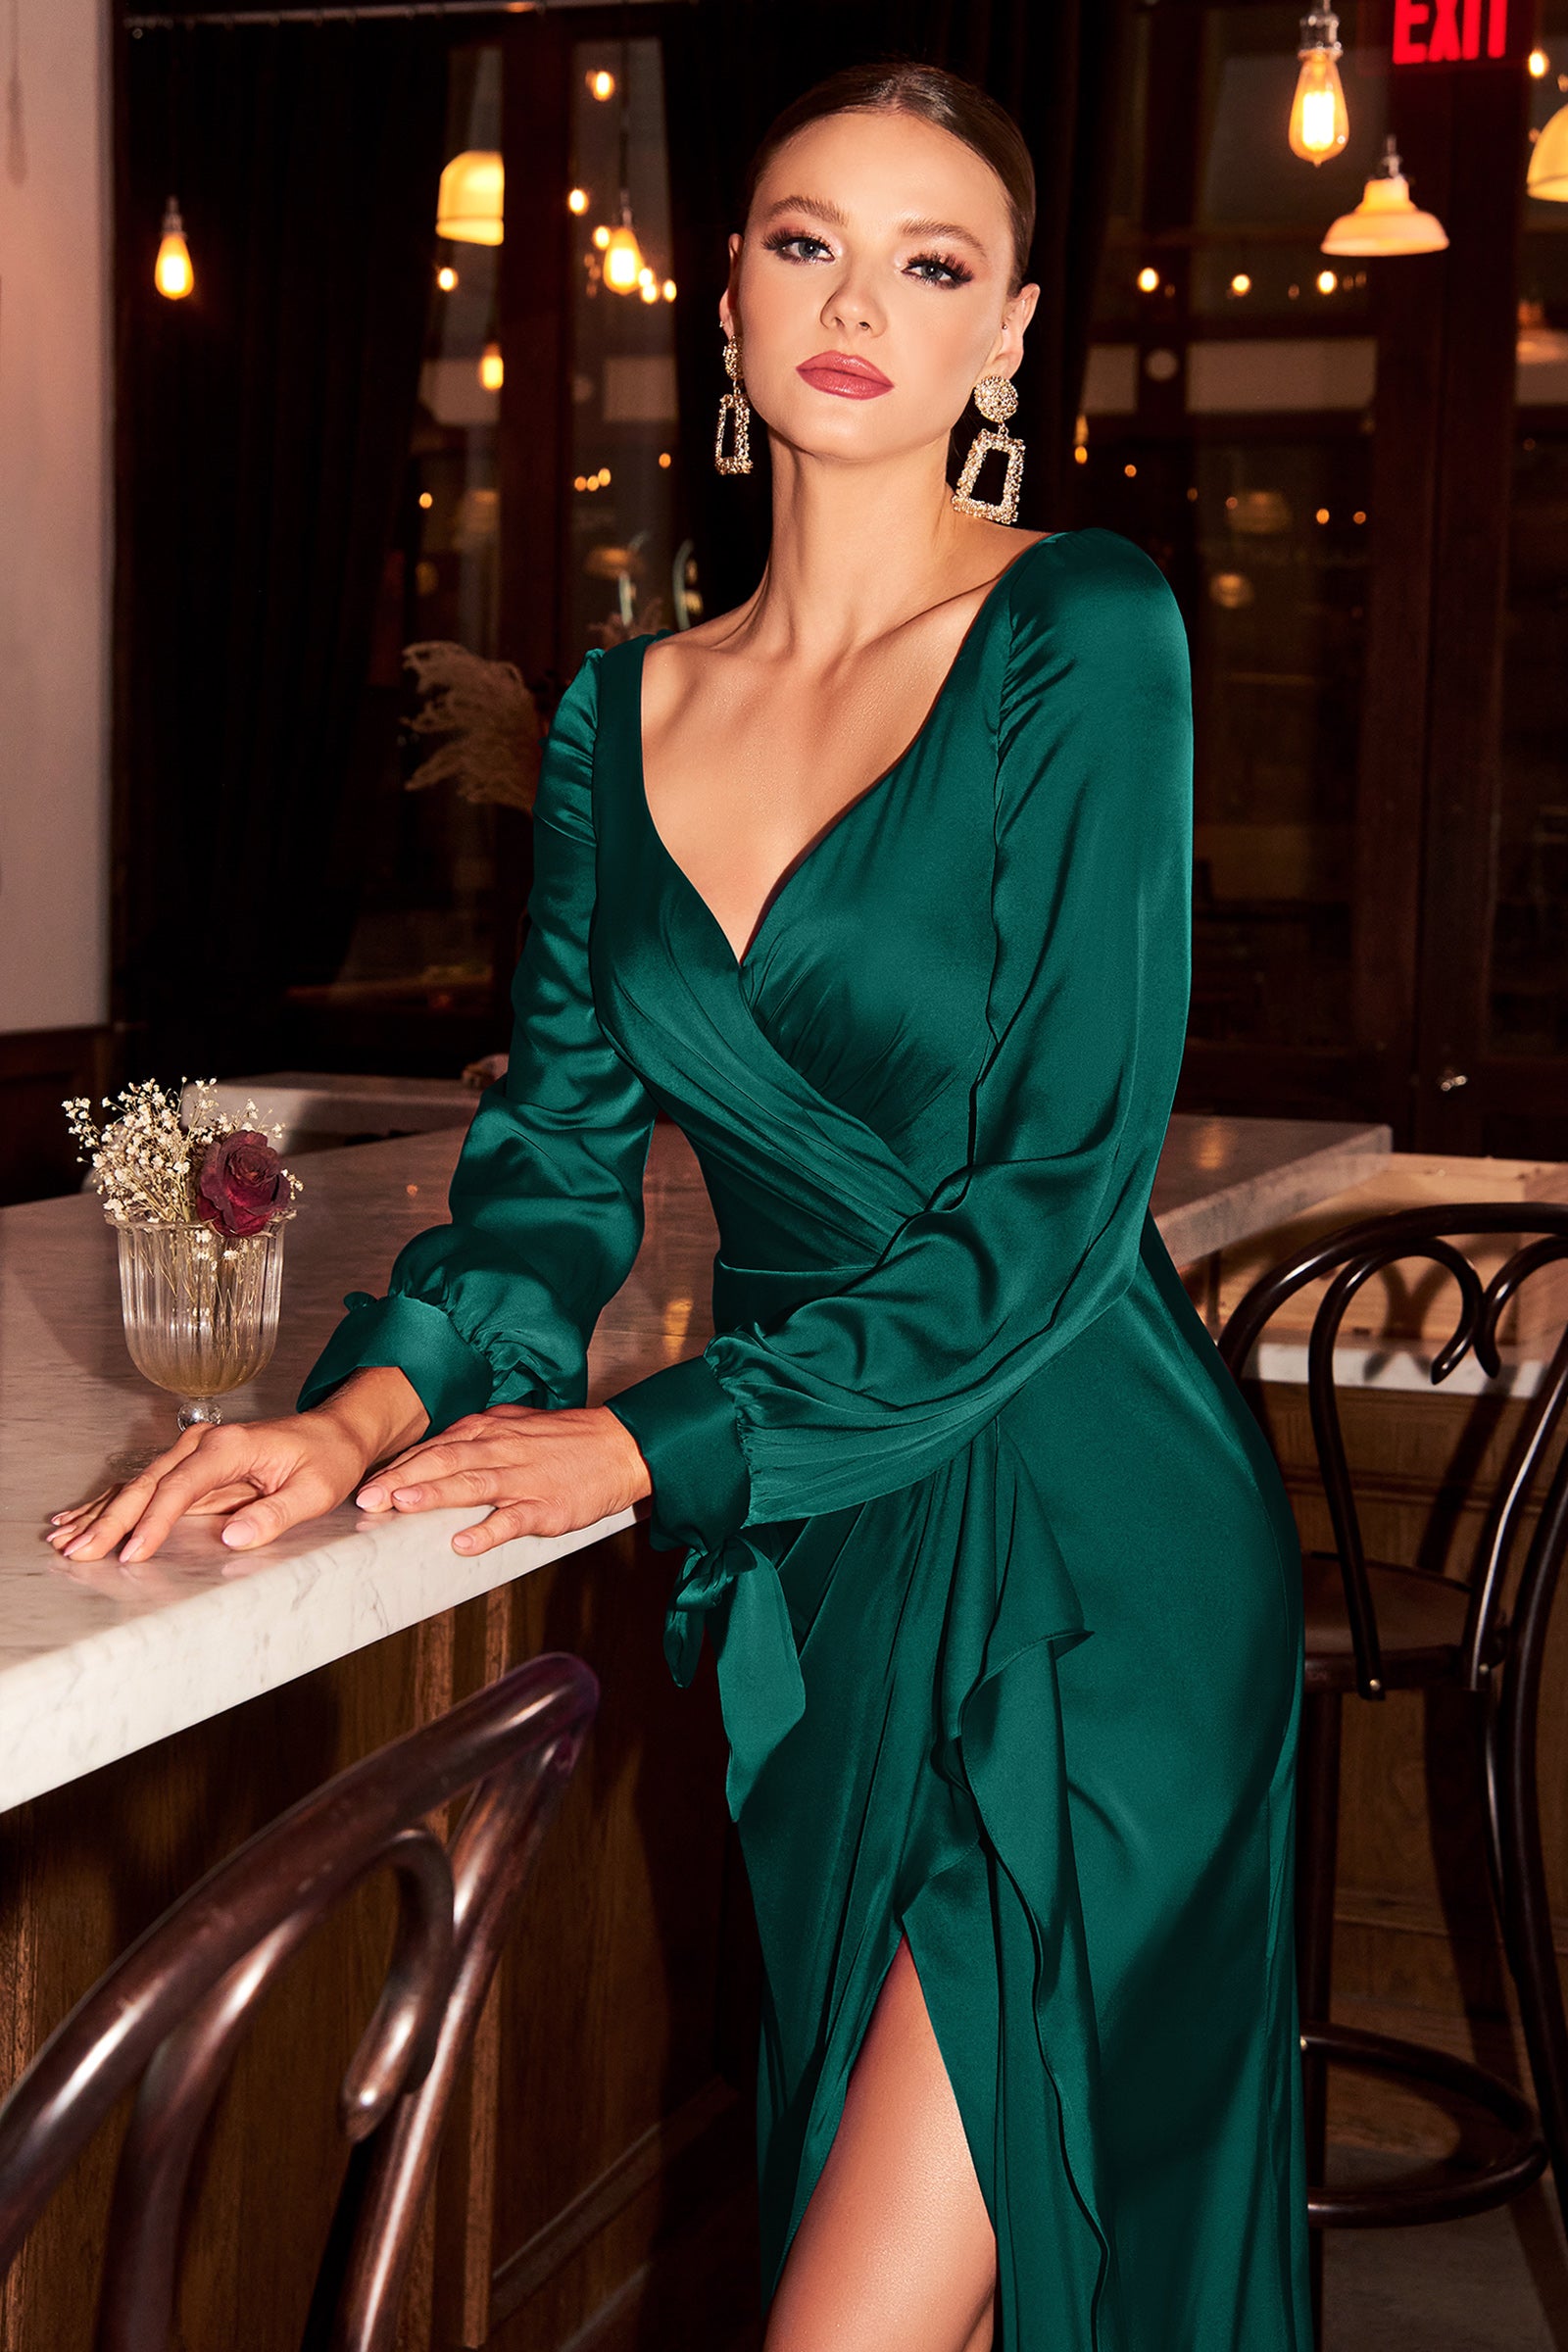 Smooth satin ensures the fluid drape of this elegant dress. The bodice features a wrap effect fashioned with pleats that cinch and sculpt your frame before falling to a romantic cascading drape and pooling floor-length hem. A front split is revealed flash